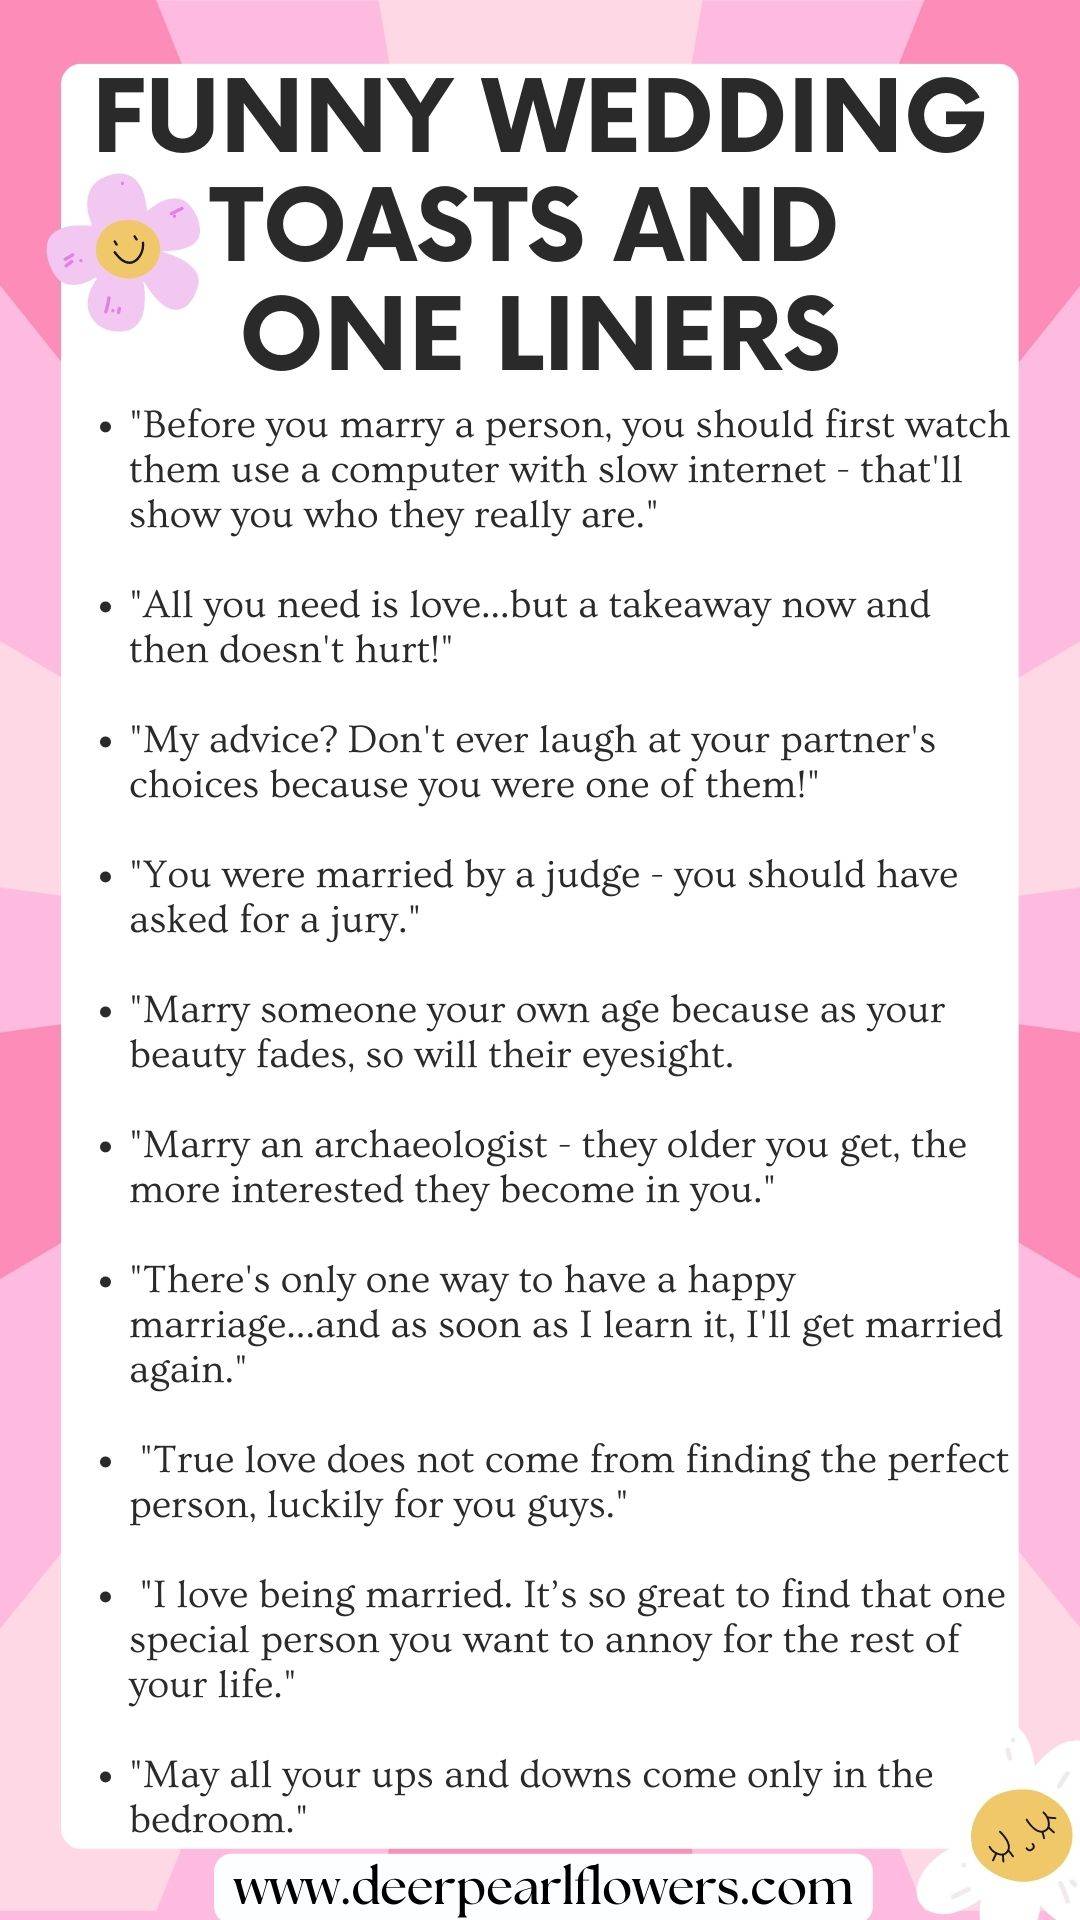 Funny Wedding Toasts and One Liners